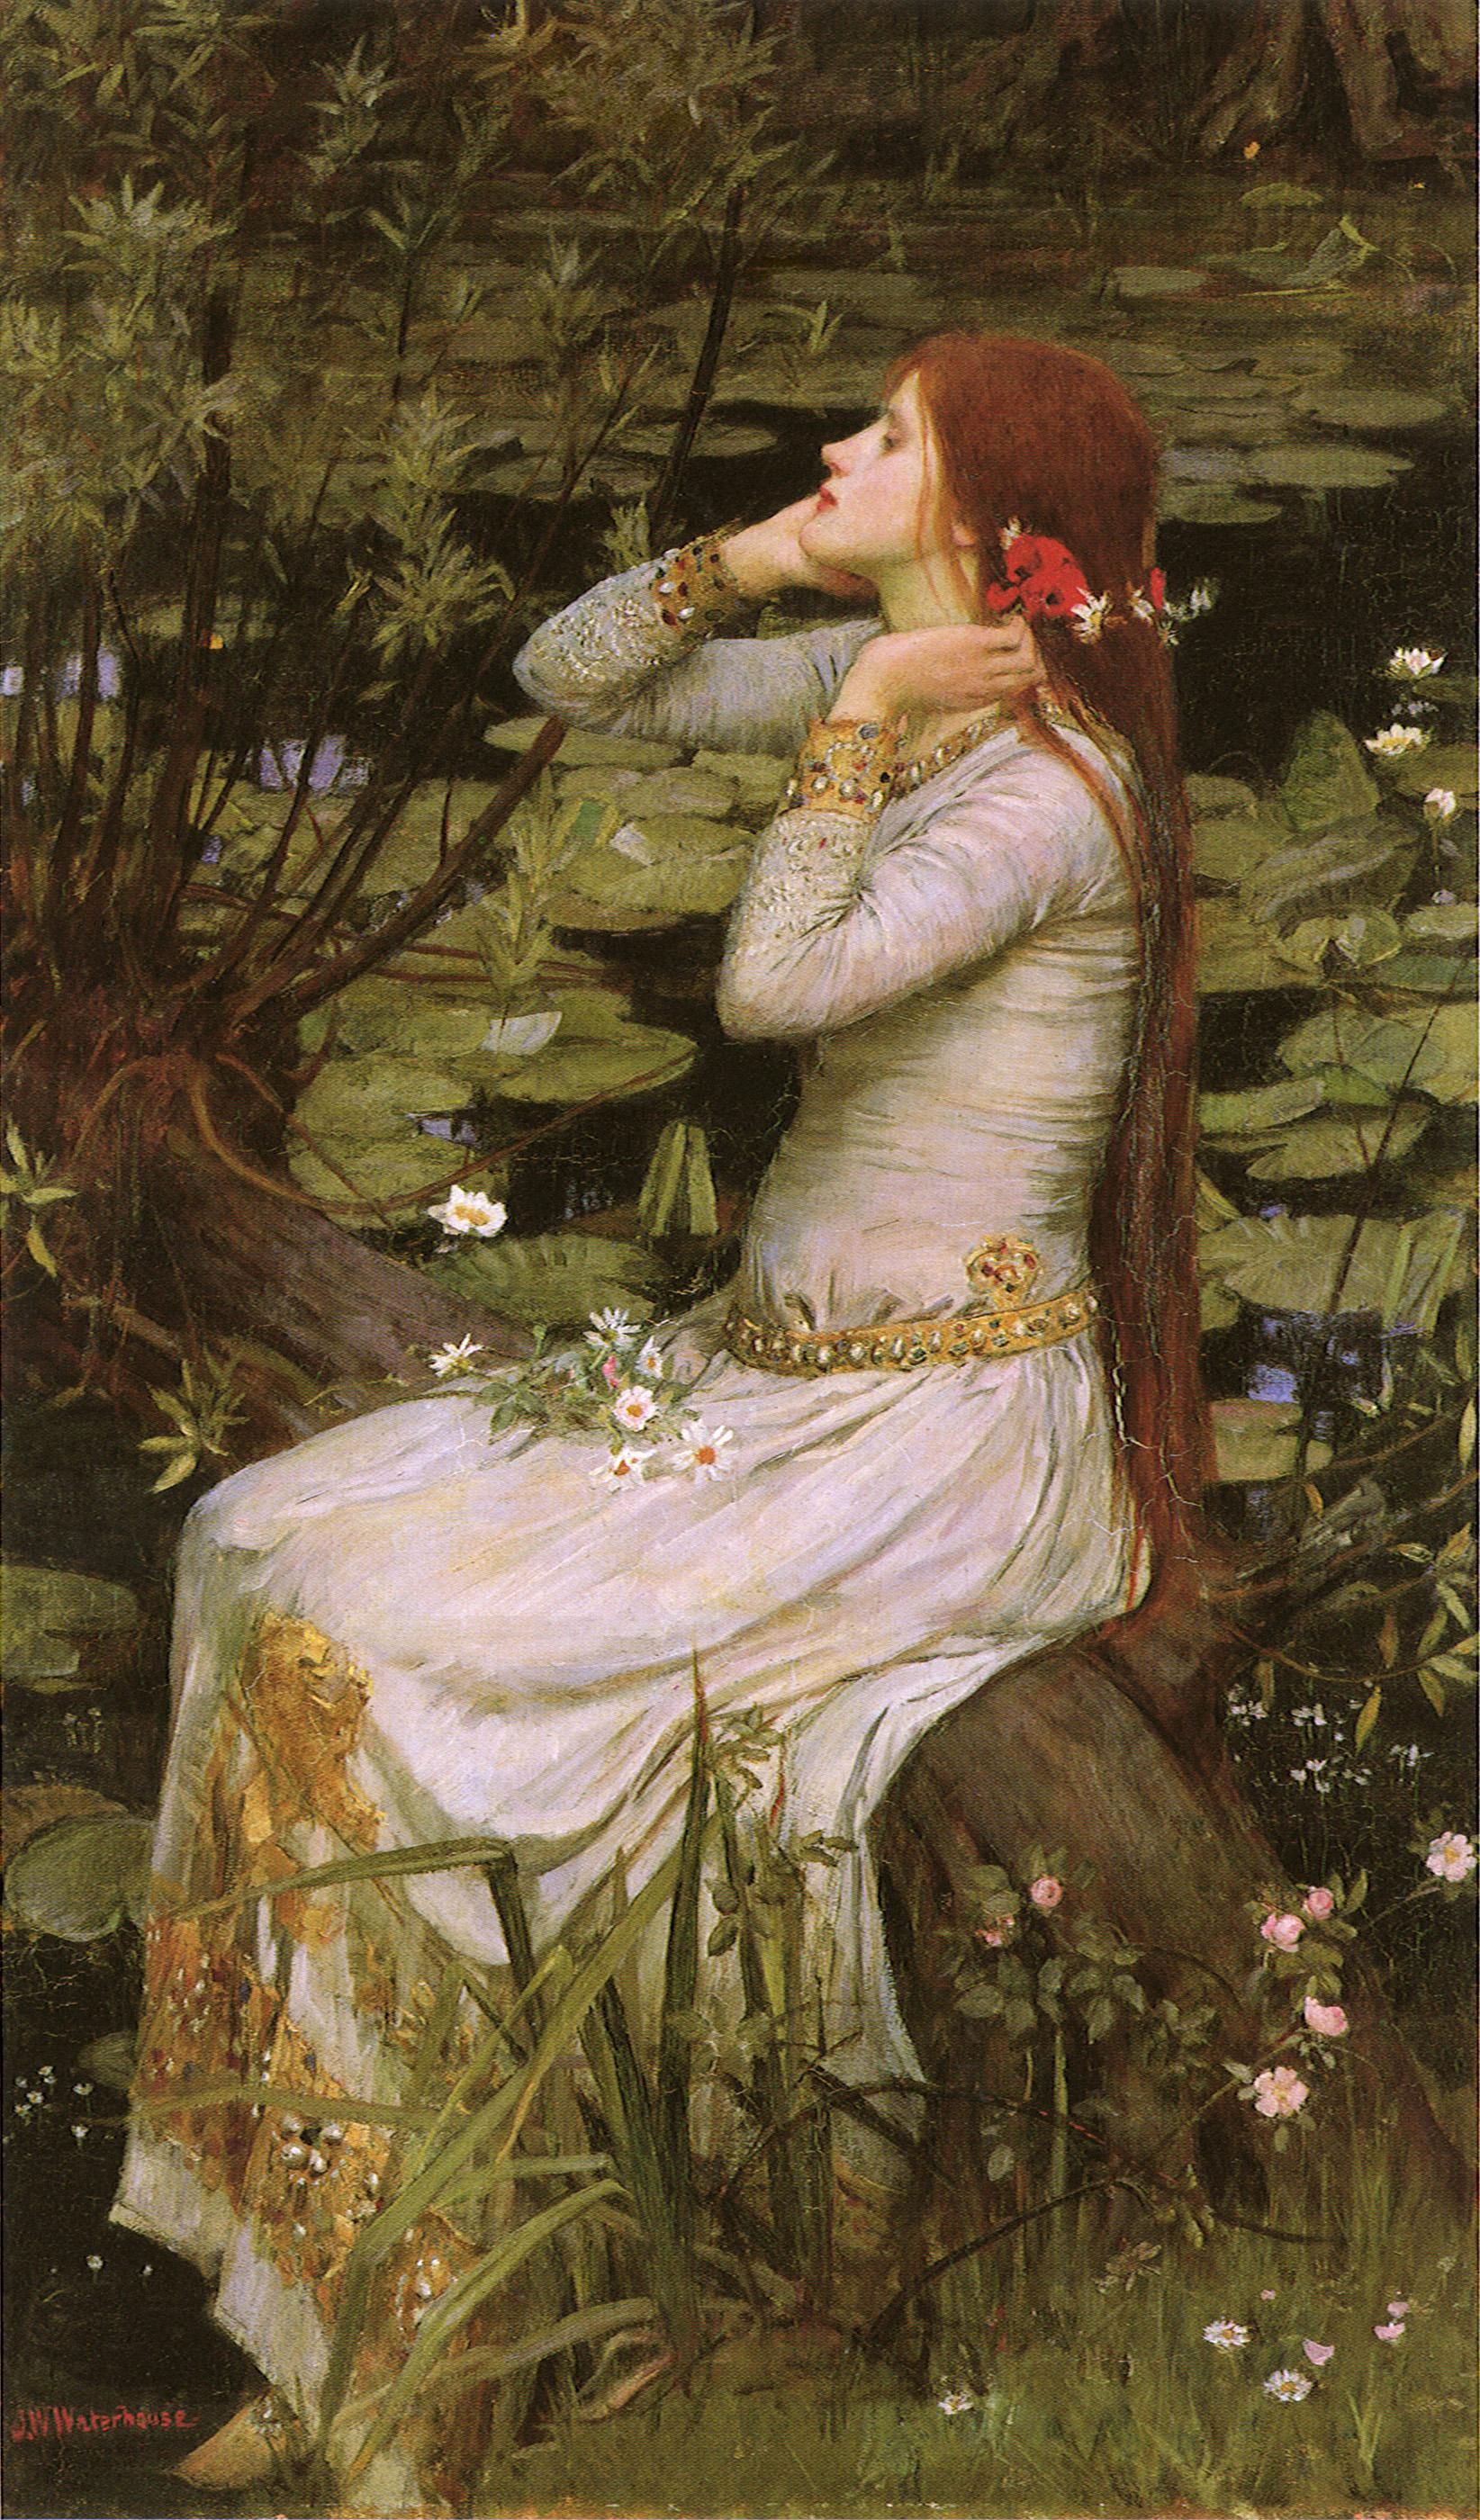 "Ophelia" by John William Waterhouse, 1894. Many portrayals of Hamlet's tragic character show her interacting with flowers, all meaningful. 